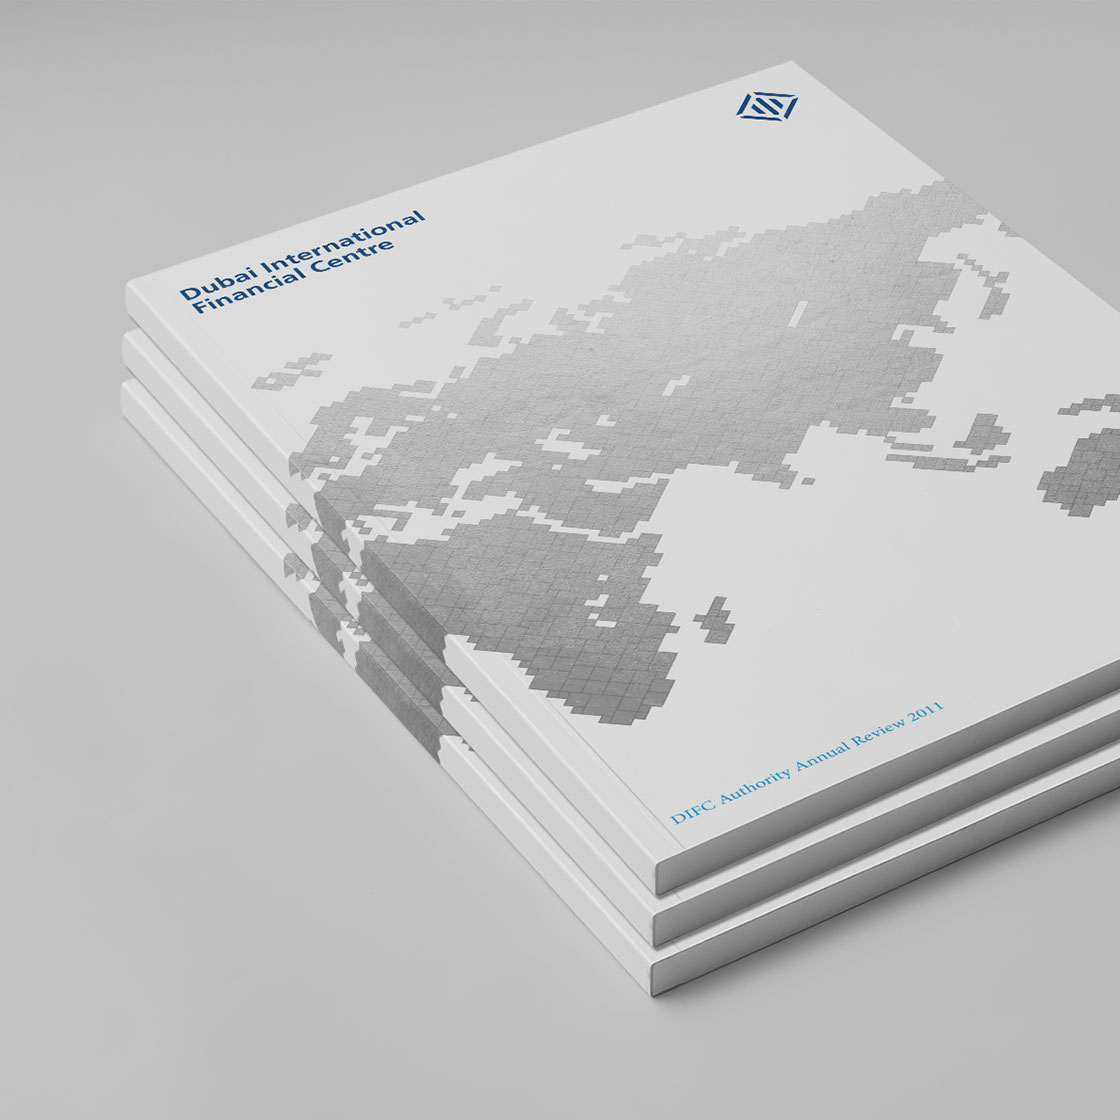 DIFC Annual Review